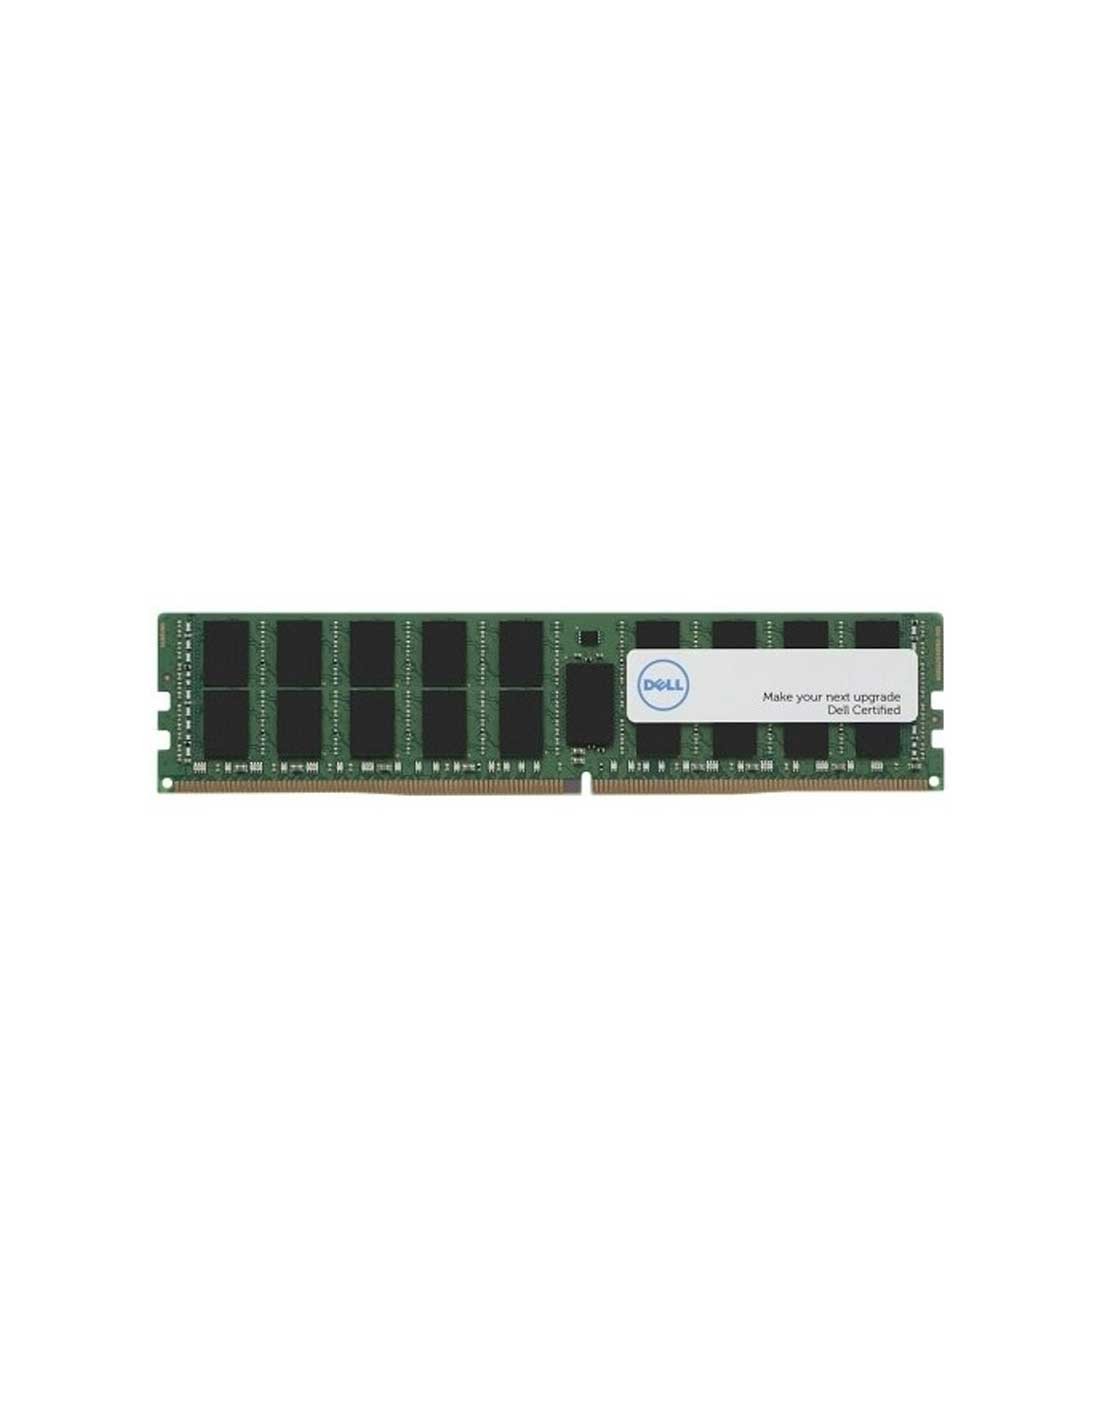 Dell Memory Upgrade - 8GB - 1Rx8 DDR4 UDIMM 2400MHz at a cheap price and fast free delivery in Dubai RAM yaddas udimm sodimm